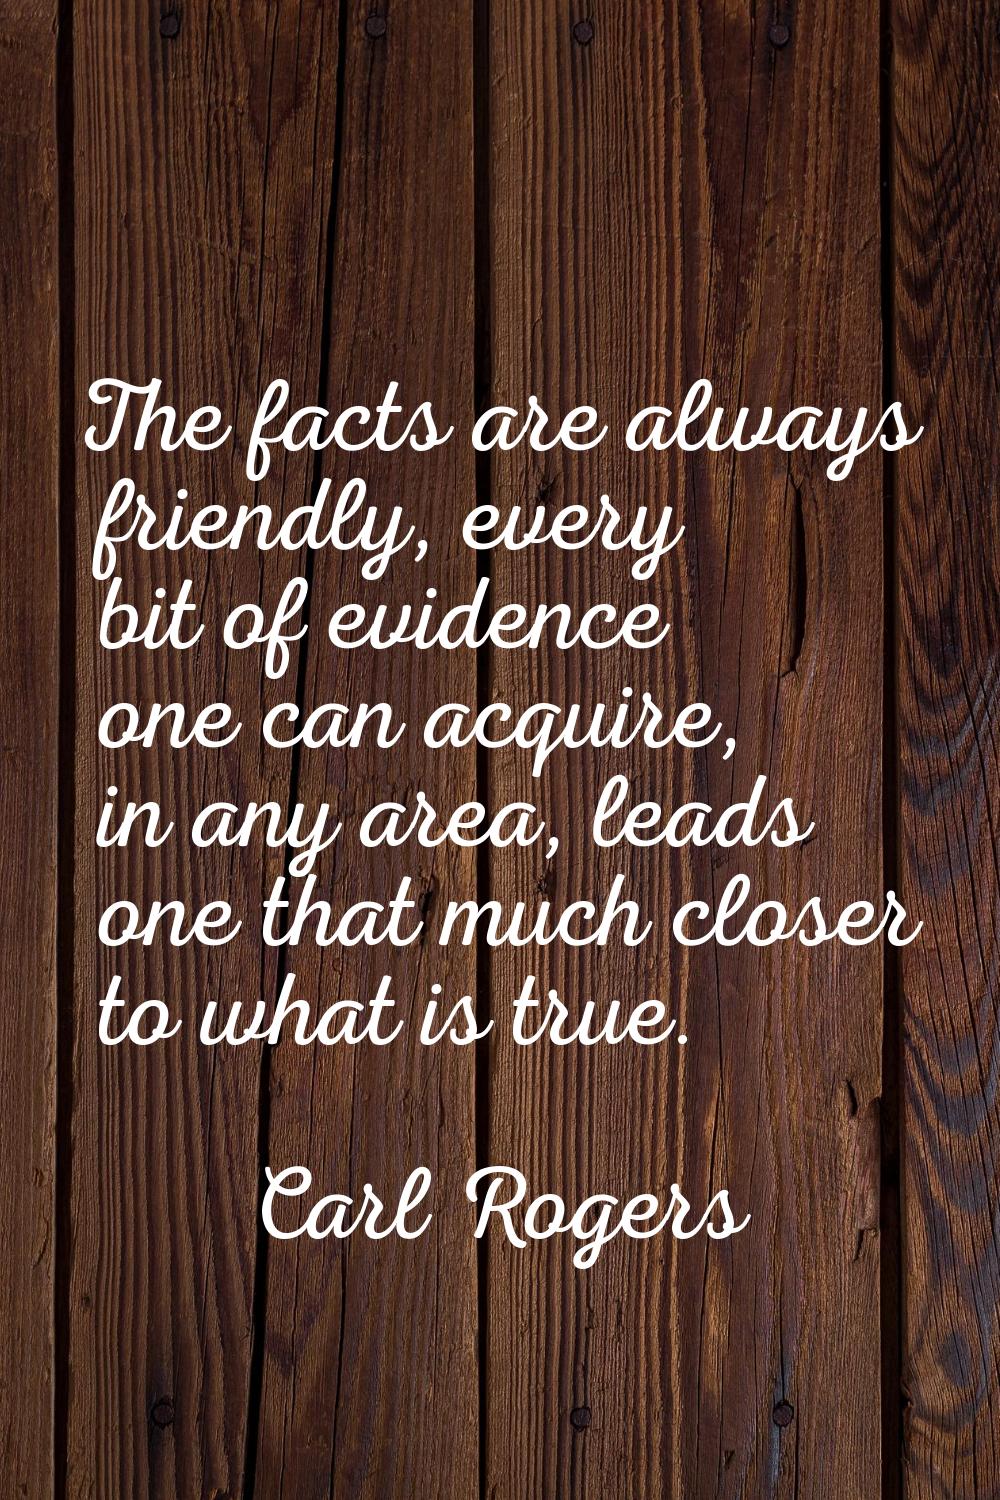 The facts are always friendly, every bit of evidence one can acquire, in any area, leads one that m